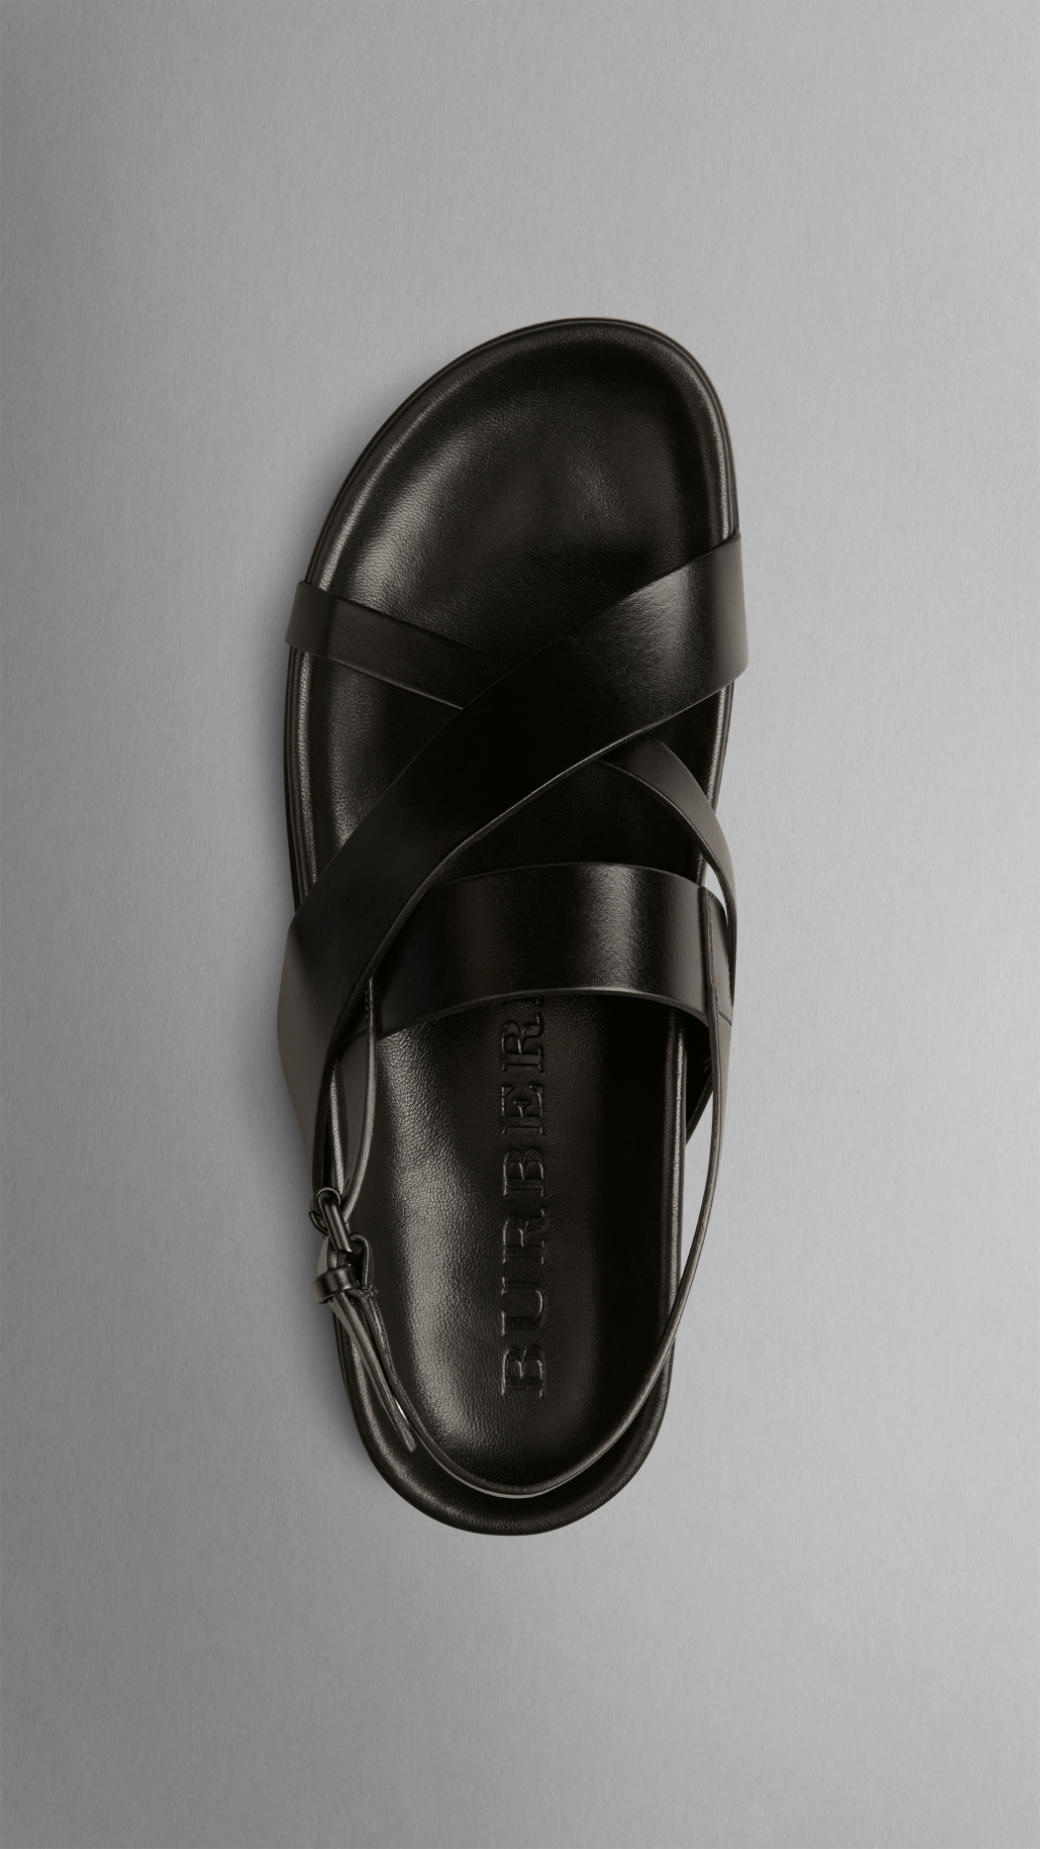 Lyst - Burberry Crossover Strap Leather Sandals in Black for Men